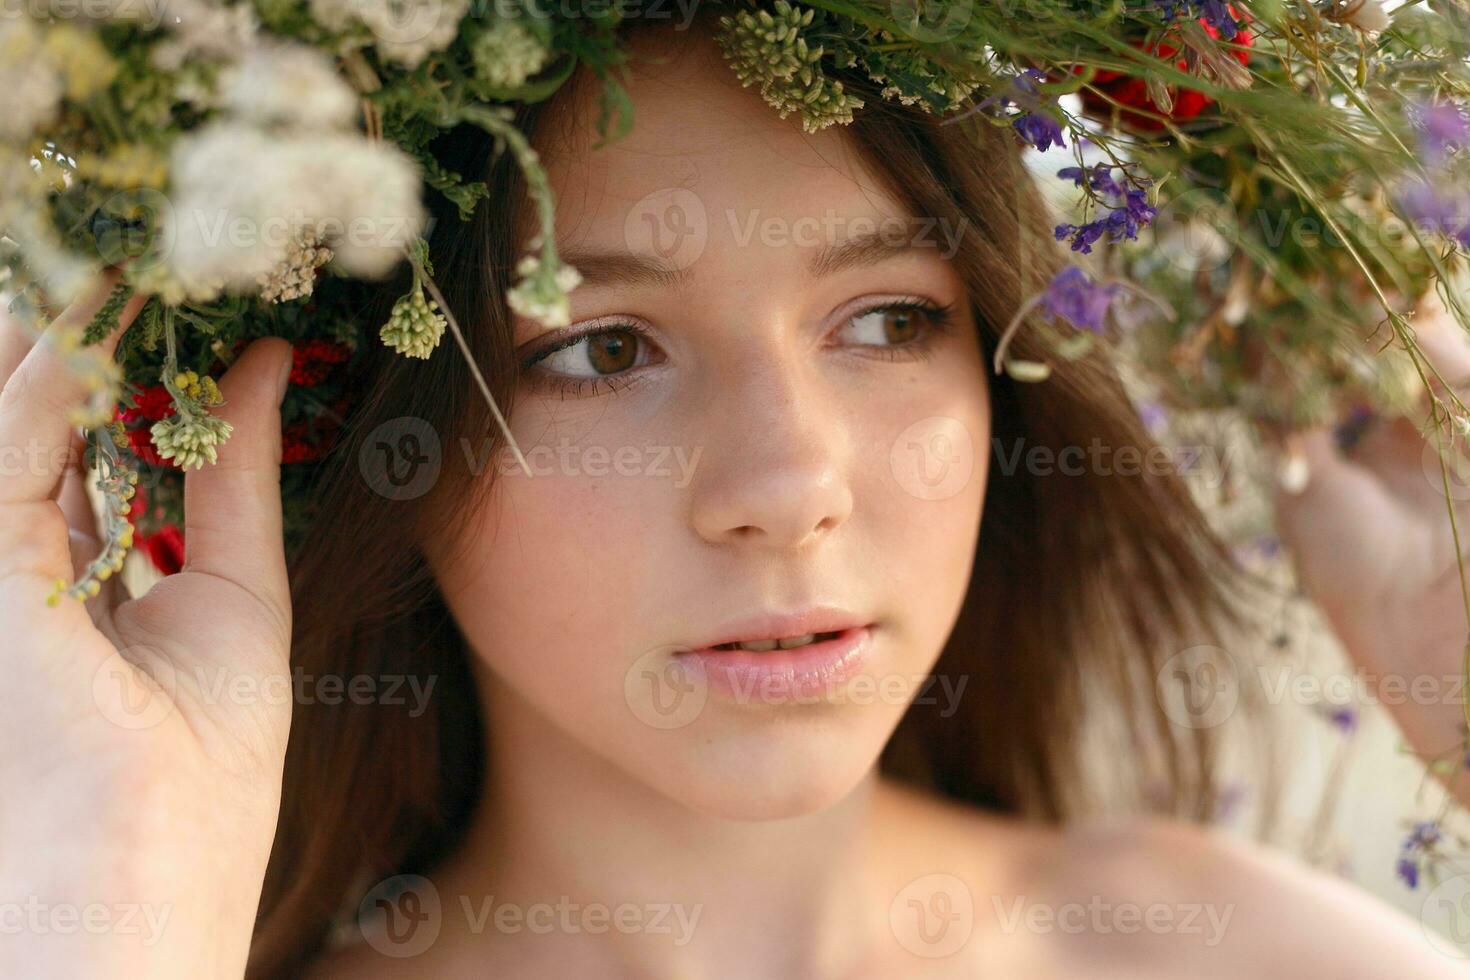 beautiful woman with a wreath on her head sitting in a field in flowers photo